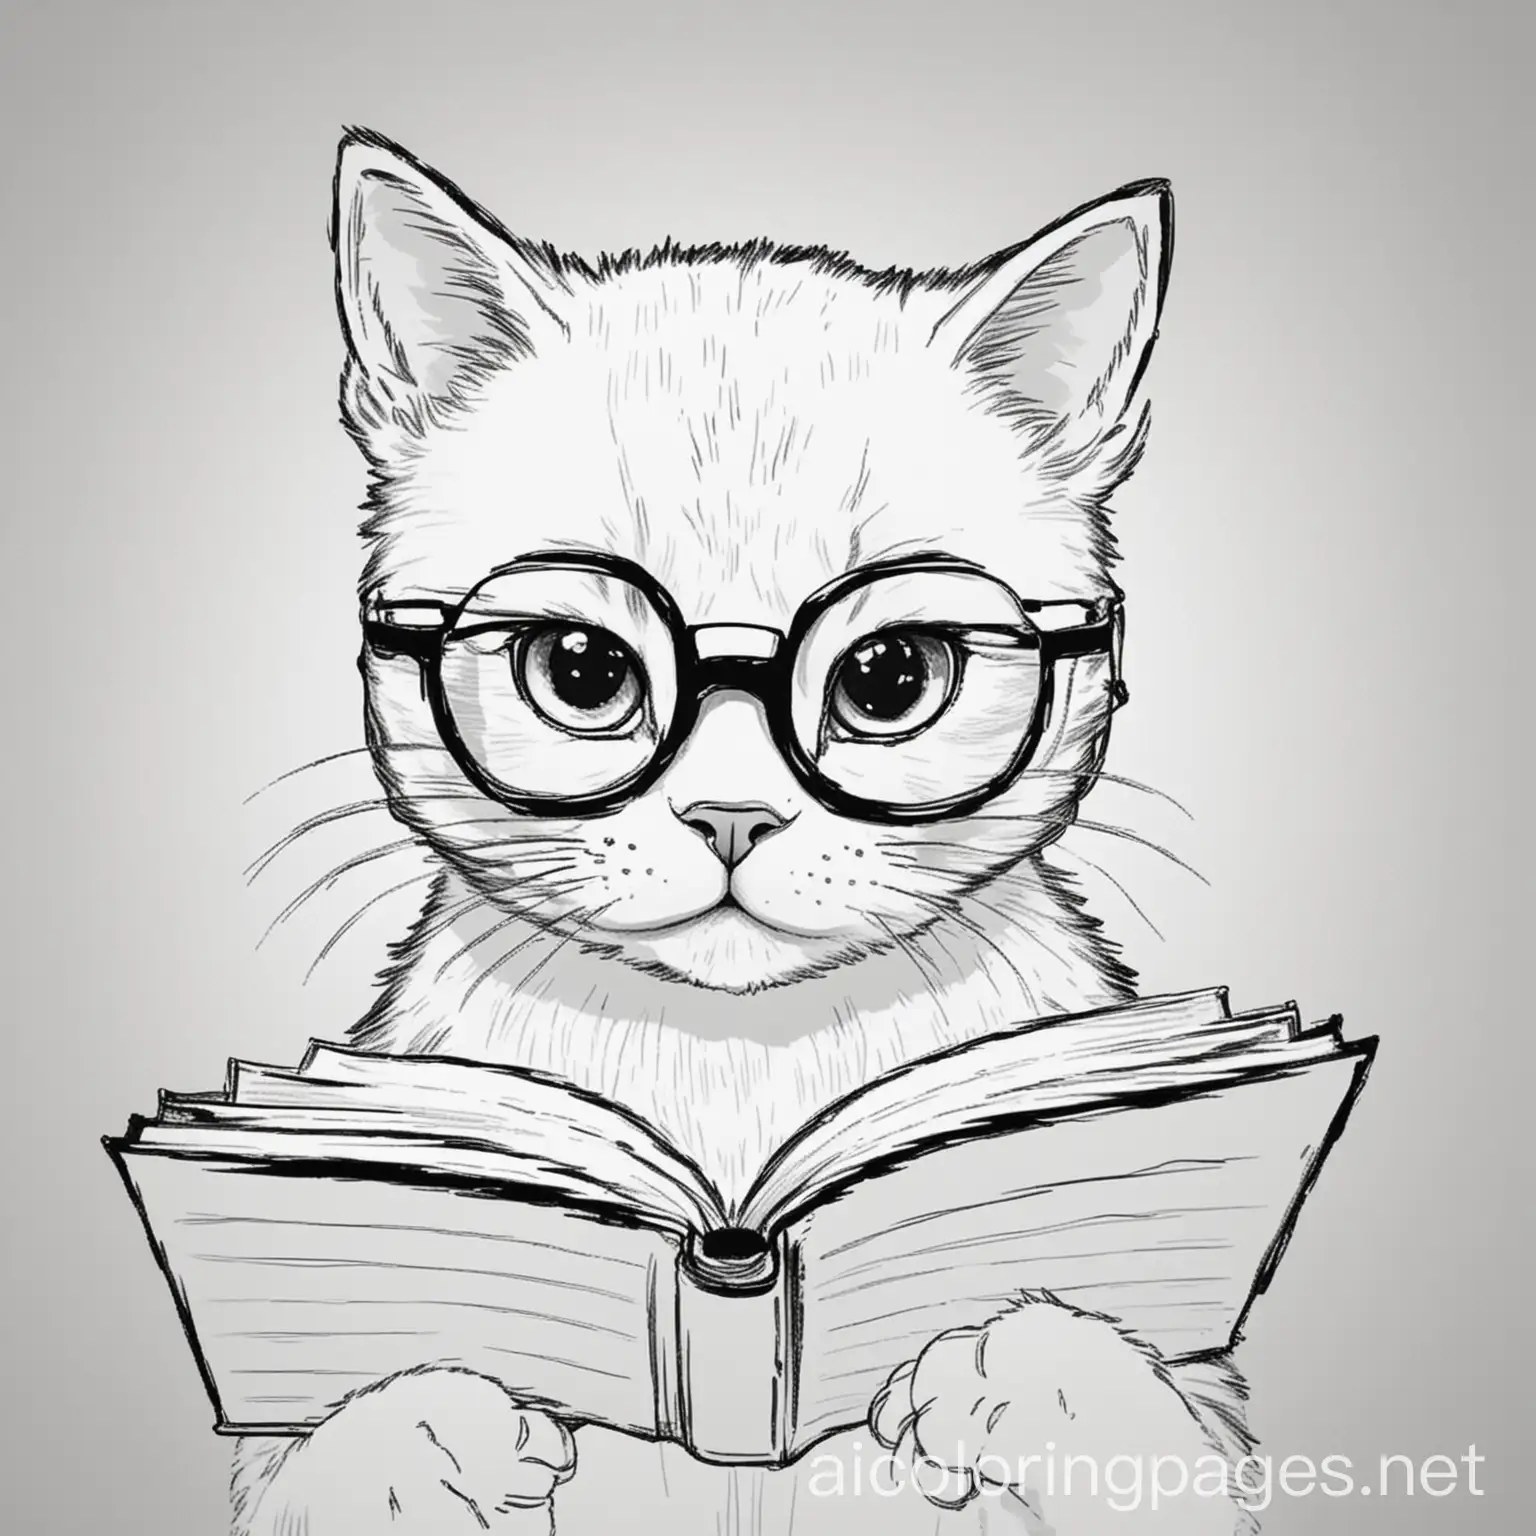 a cat with glasses reading a book, Coloring Page, black and white, line art, white background, Simplicity, Ample White Space. The background of the coloring page is plain white to make it easy for young children to color within the lines. The outlines of all the subjects are easy to distinguish, making it simple for kids to color without too much difficulty